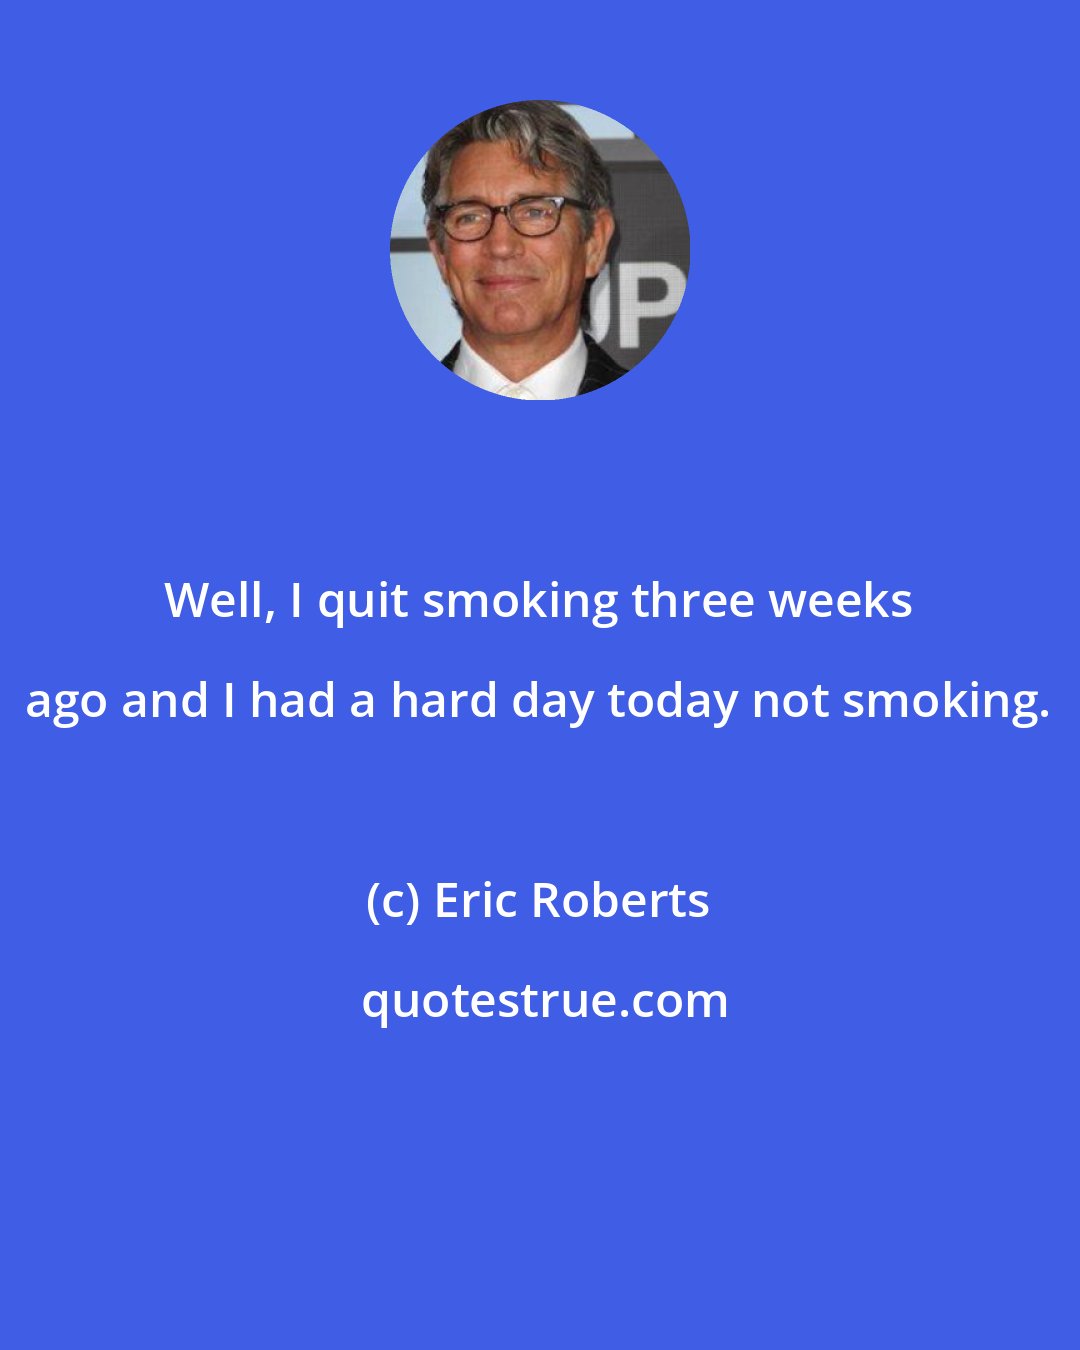 Eric Roberts: Well, I quit smoking three weeks ago and I had a hard day today not smoking.